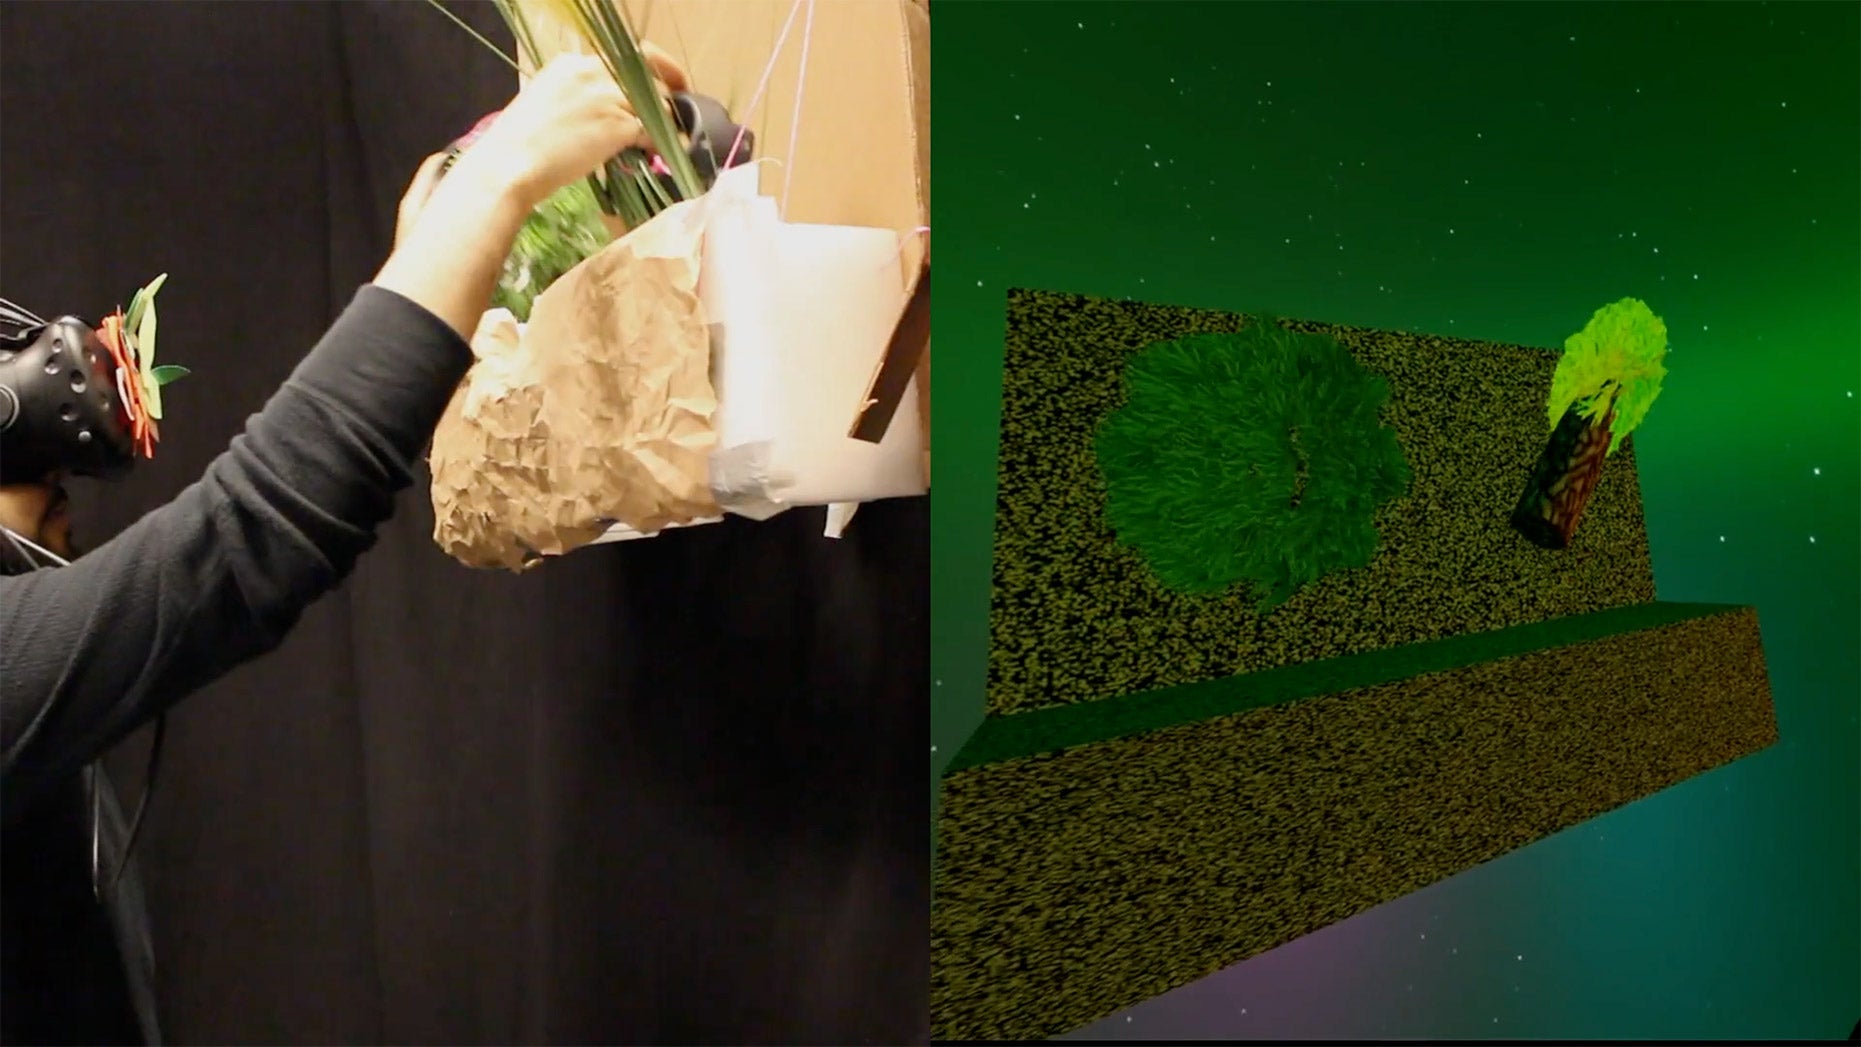 Person using VR headset and interacting with physical object like a tree, with screenshot of VR experience beside it.